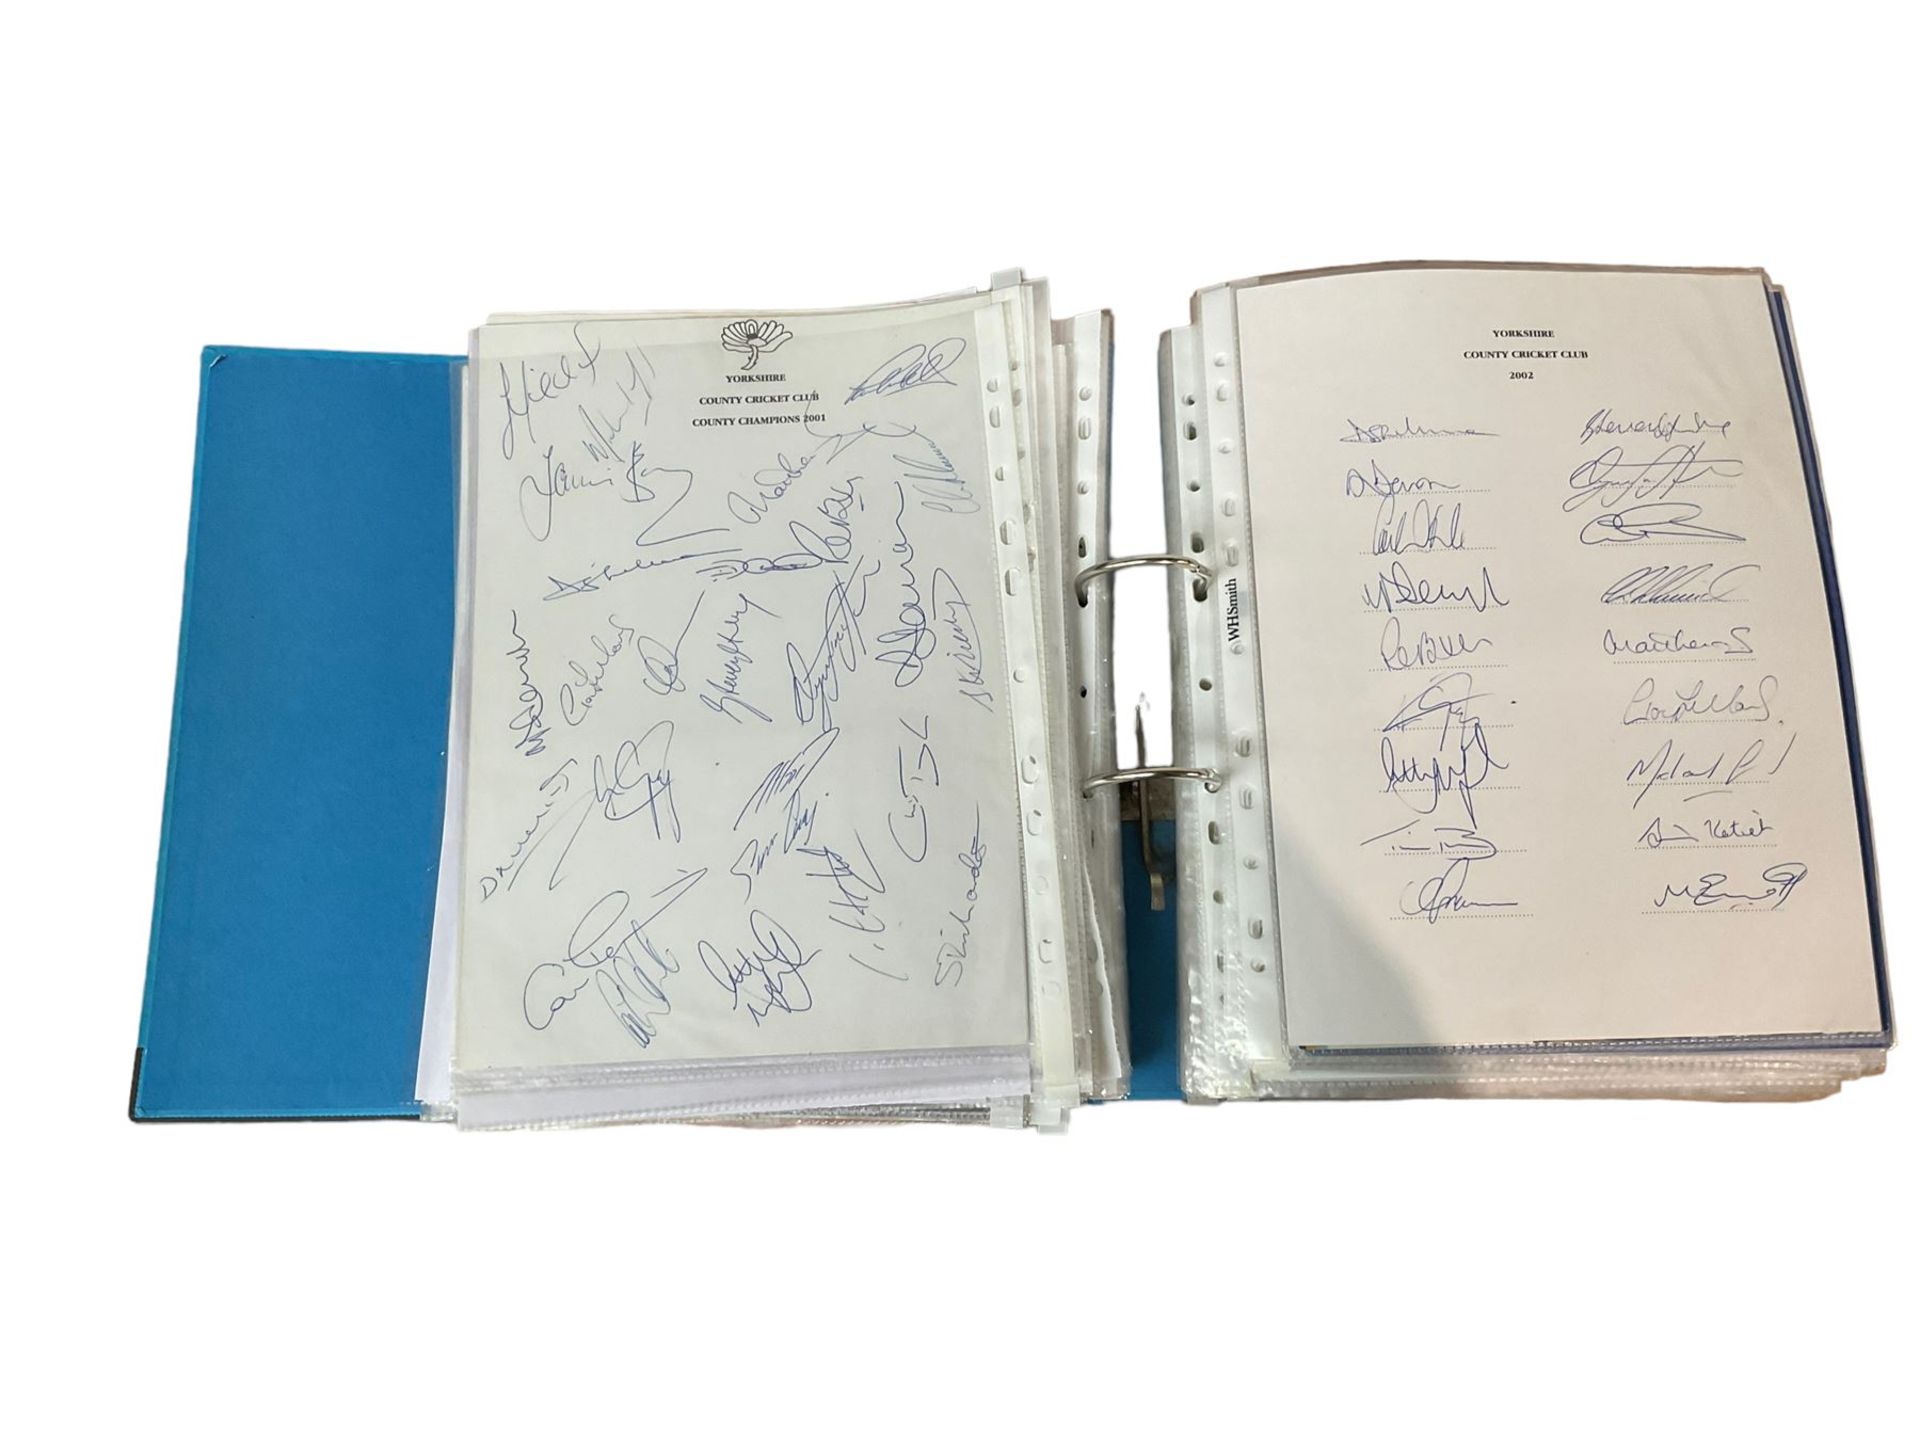 Yorkshire Cricket - various autographs and signatures including Geoffrey Boycott - Image 5 of 10